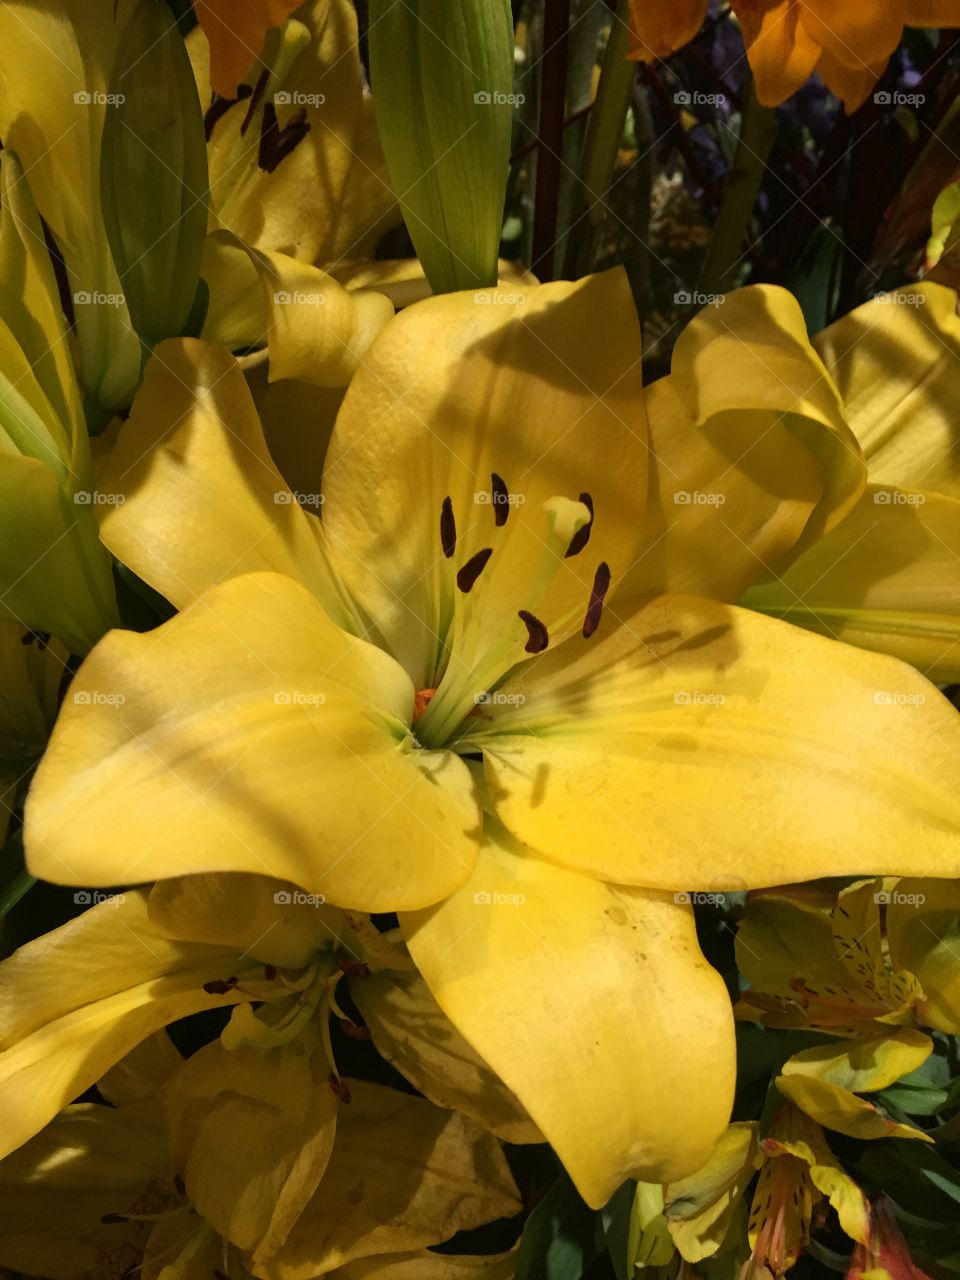 Lilies are beautiful